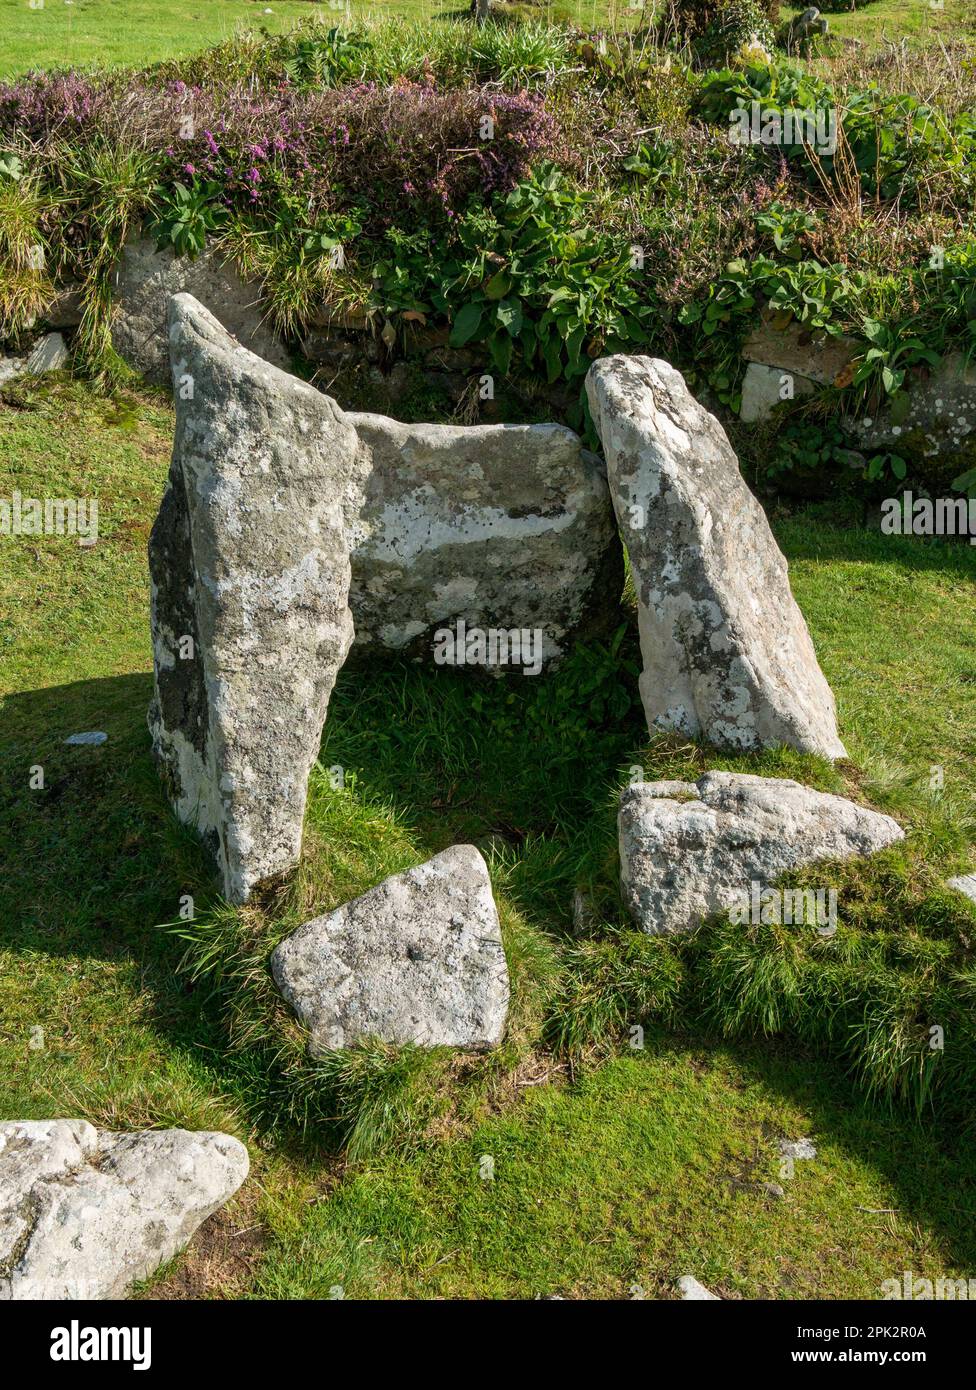 Stone fireplace hearth inside remains of Courtyard house, Chysauster Ancient Village, Cornwall, England, UK Stock Photo